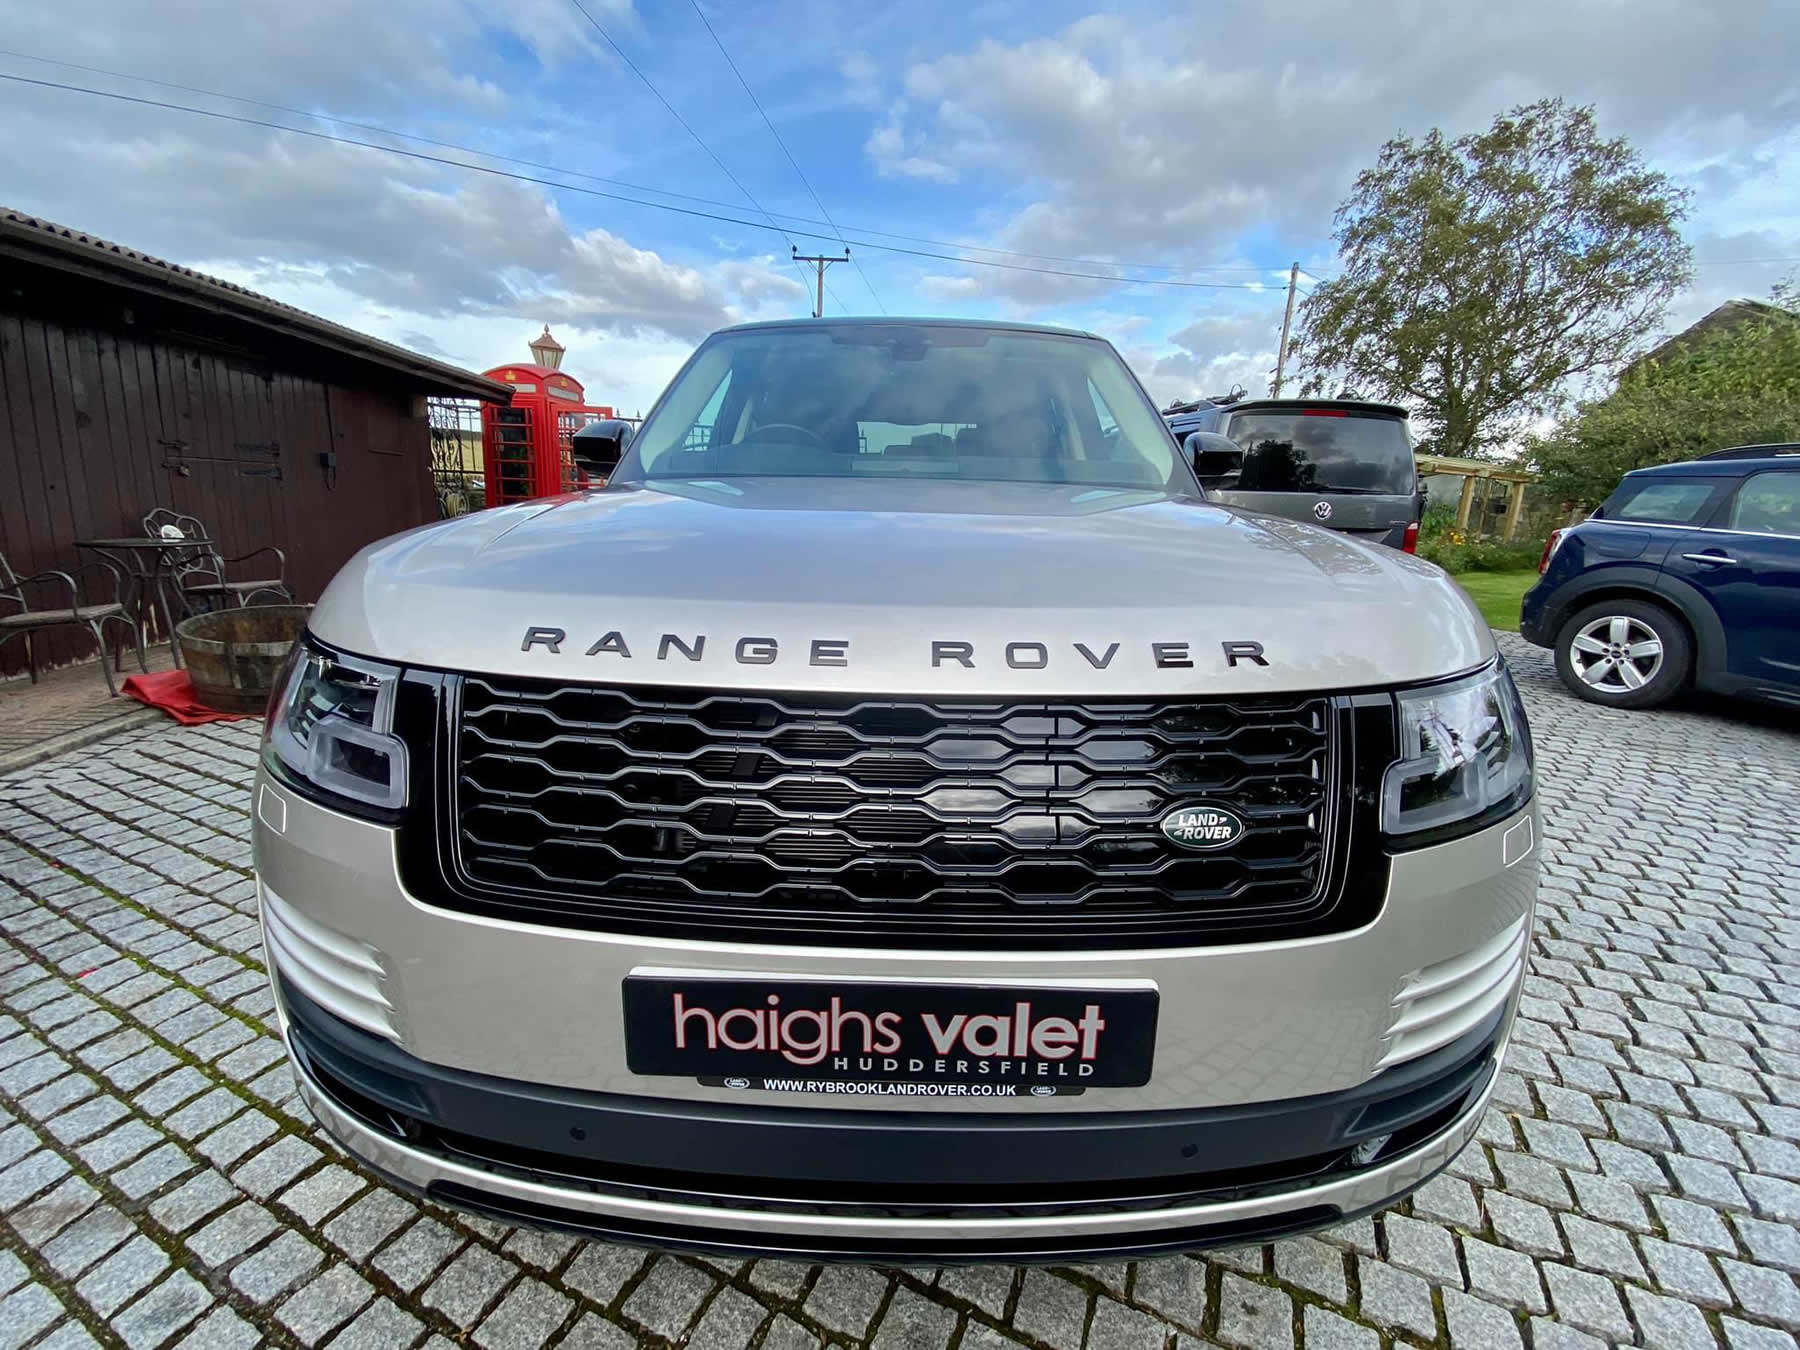 Haighs Valet Huddersfield - © Haighs Valet <br />
<b>Strict Standards</b>:  date(): We selected 'Europe/Berlin' for 'CET/1.0/no DST' instead in <b>/homepages/20/d164784699/htdocs/gallery.php</b> on line <b>219</b><br />
2022